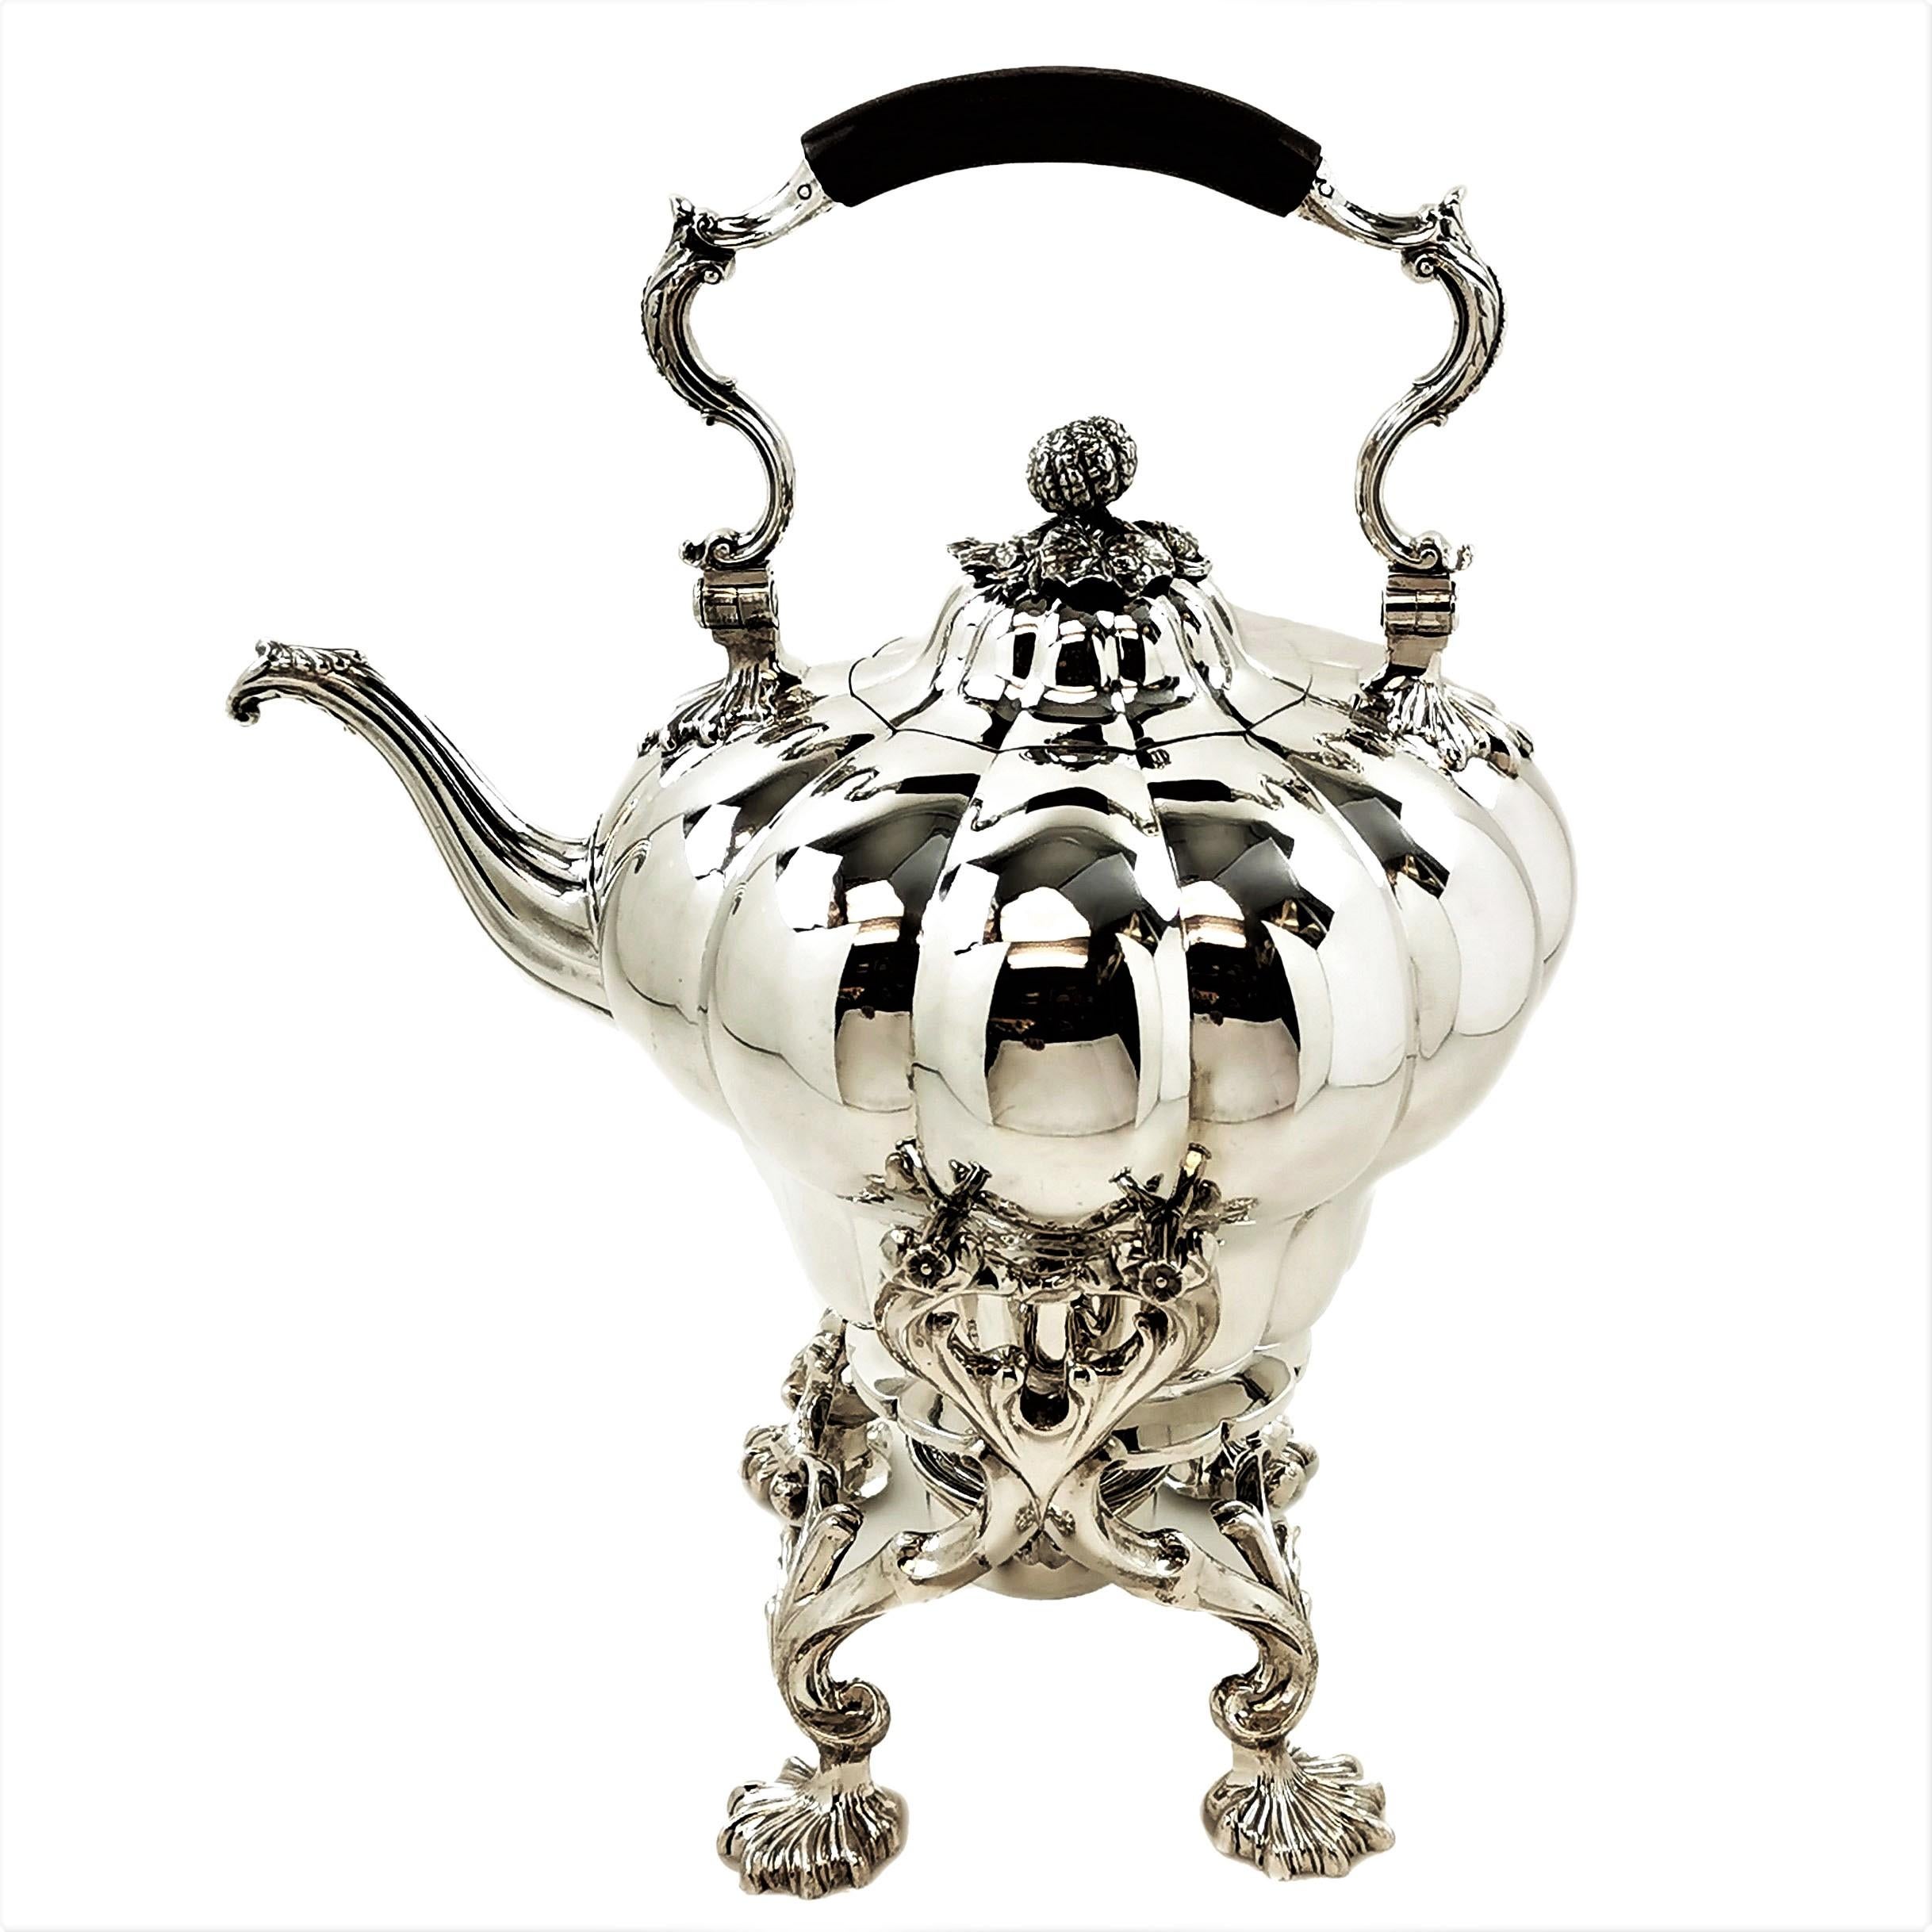 English Large Antique William IV Sterling Silver Kettle on Stand 1836 Melon Pattern